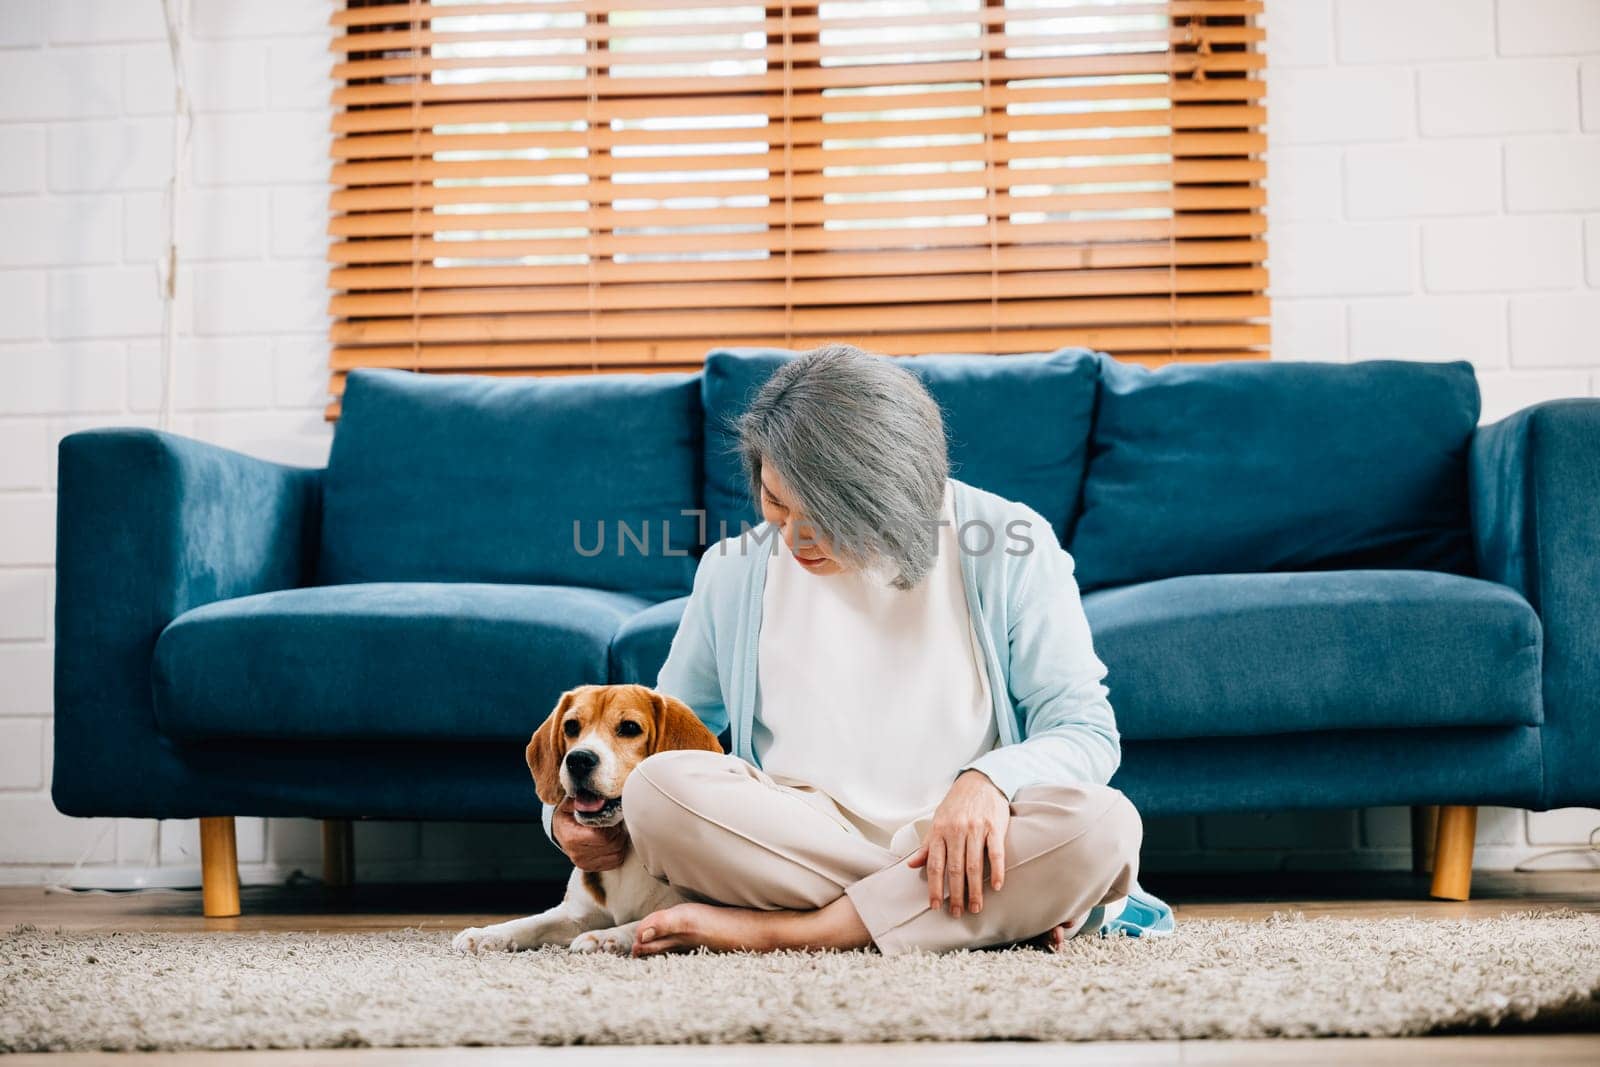 A portrait of happiness, An elderly woman and her Beagle puppy share a delightful moment on the sofa in their cozy living room. Their smiles reflect the togetherness and joy of pet companionship. by Sorapop